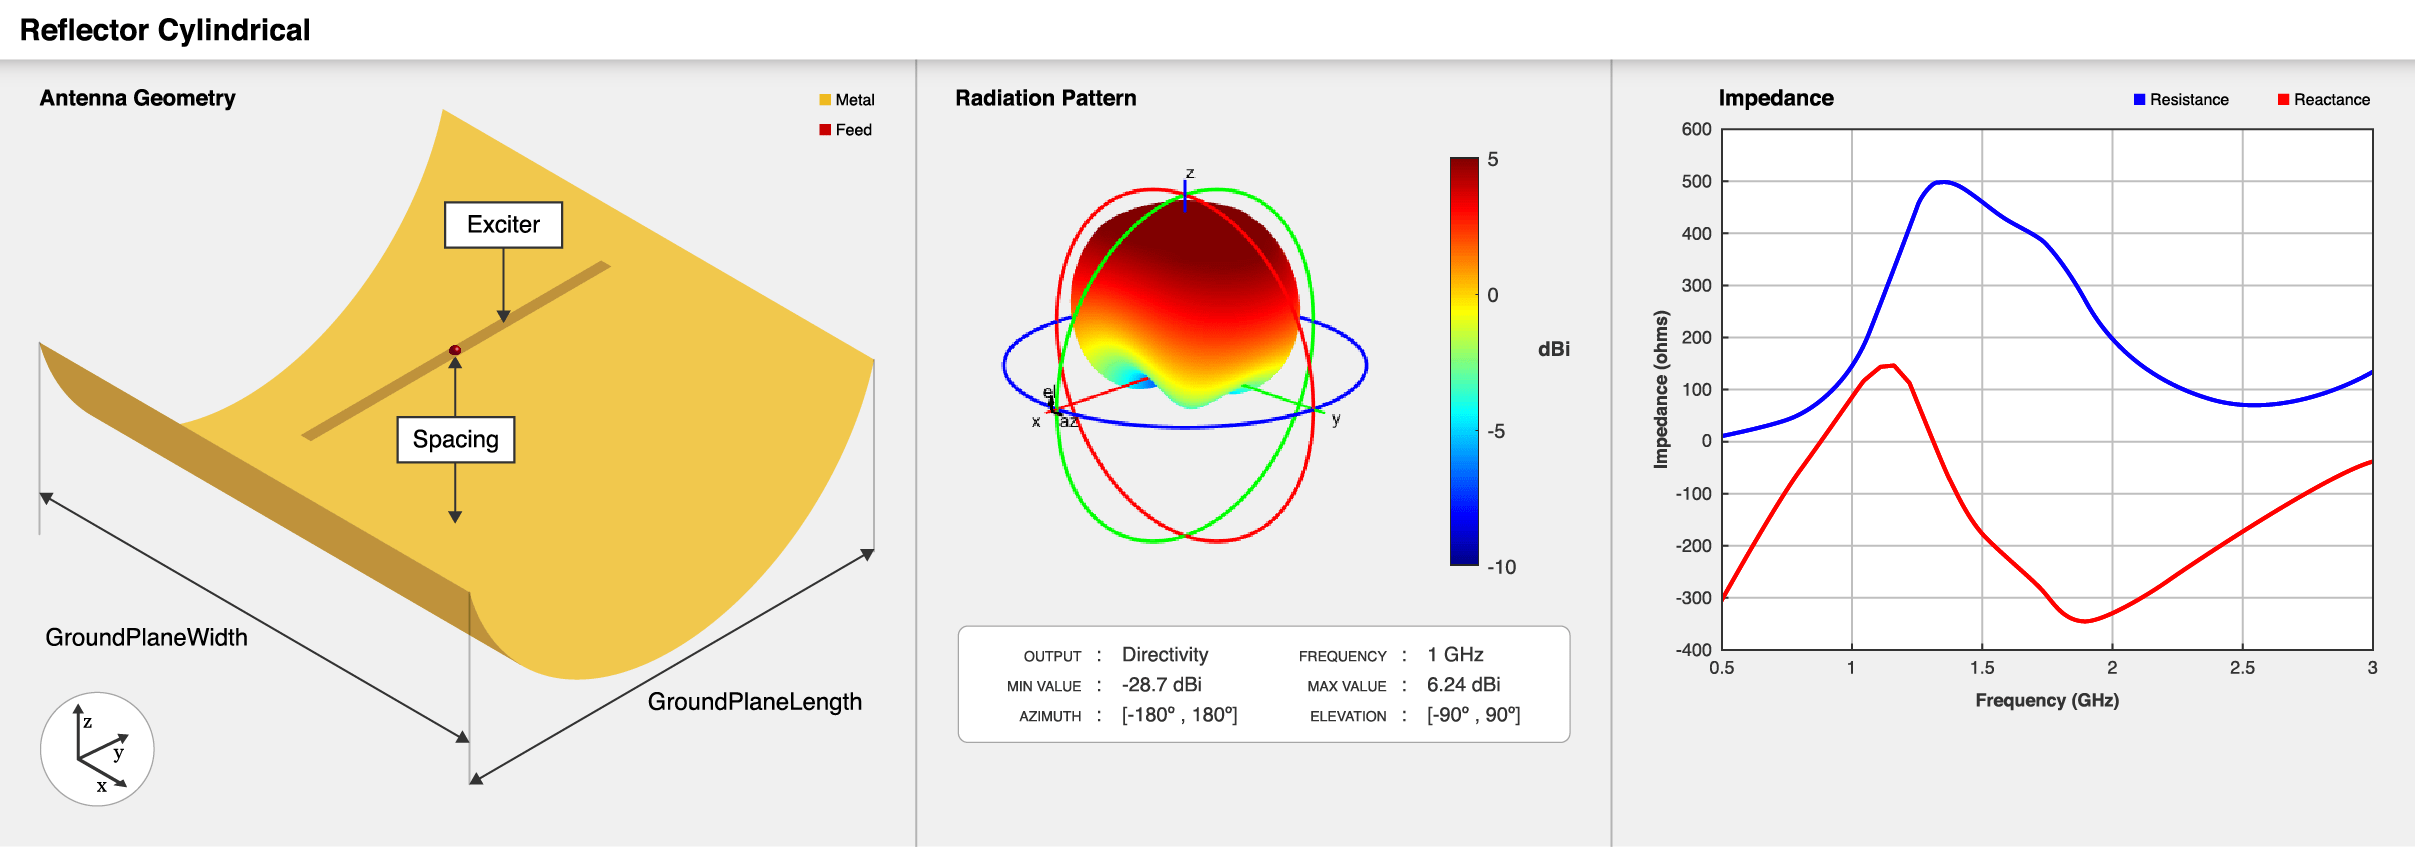 Cylindrical reflector antenna geometry, default radiation pattern, and impedance plot.